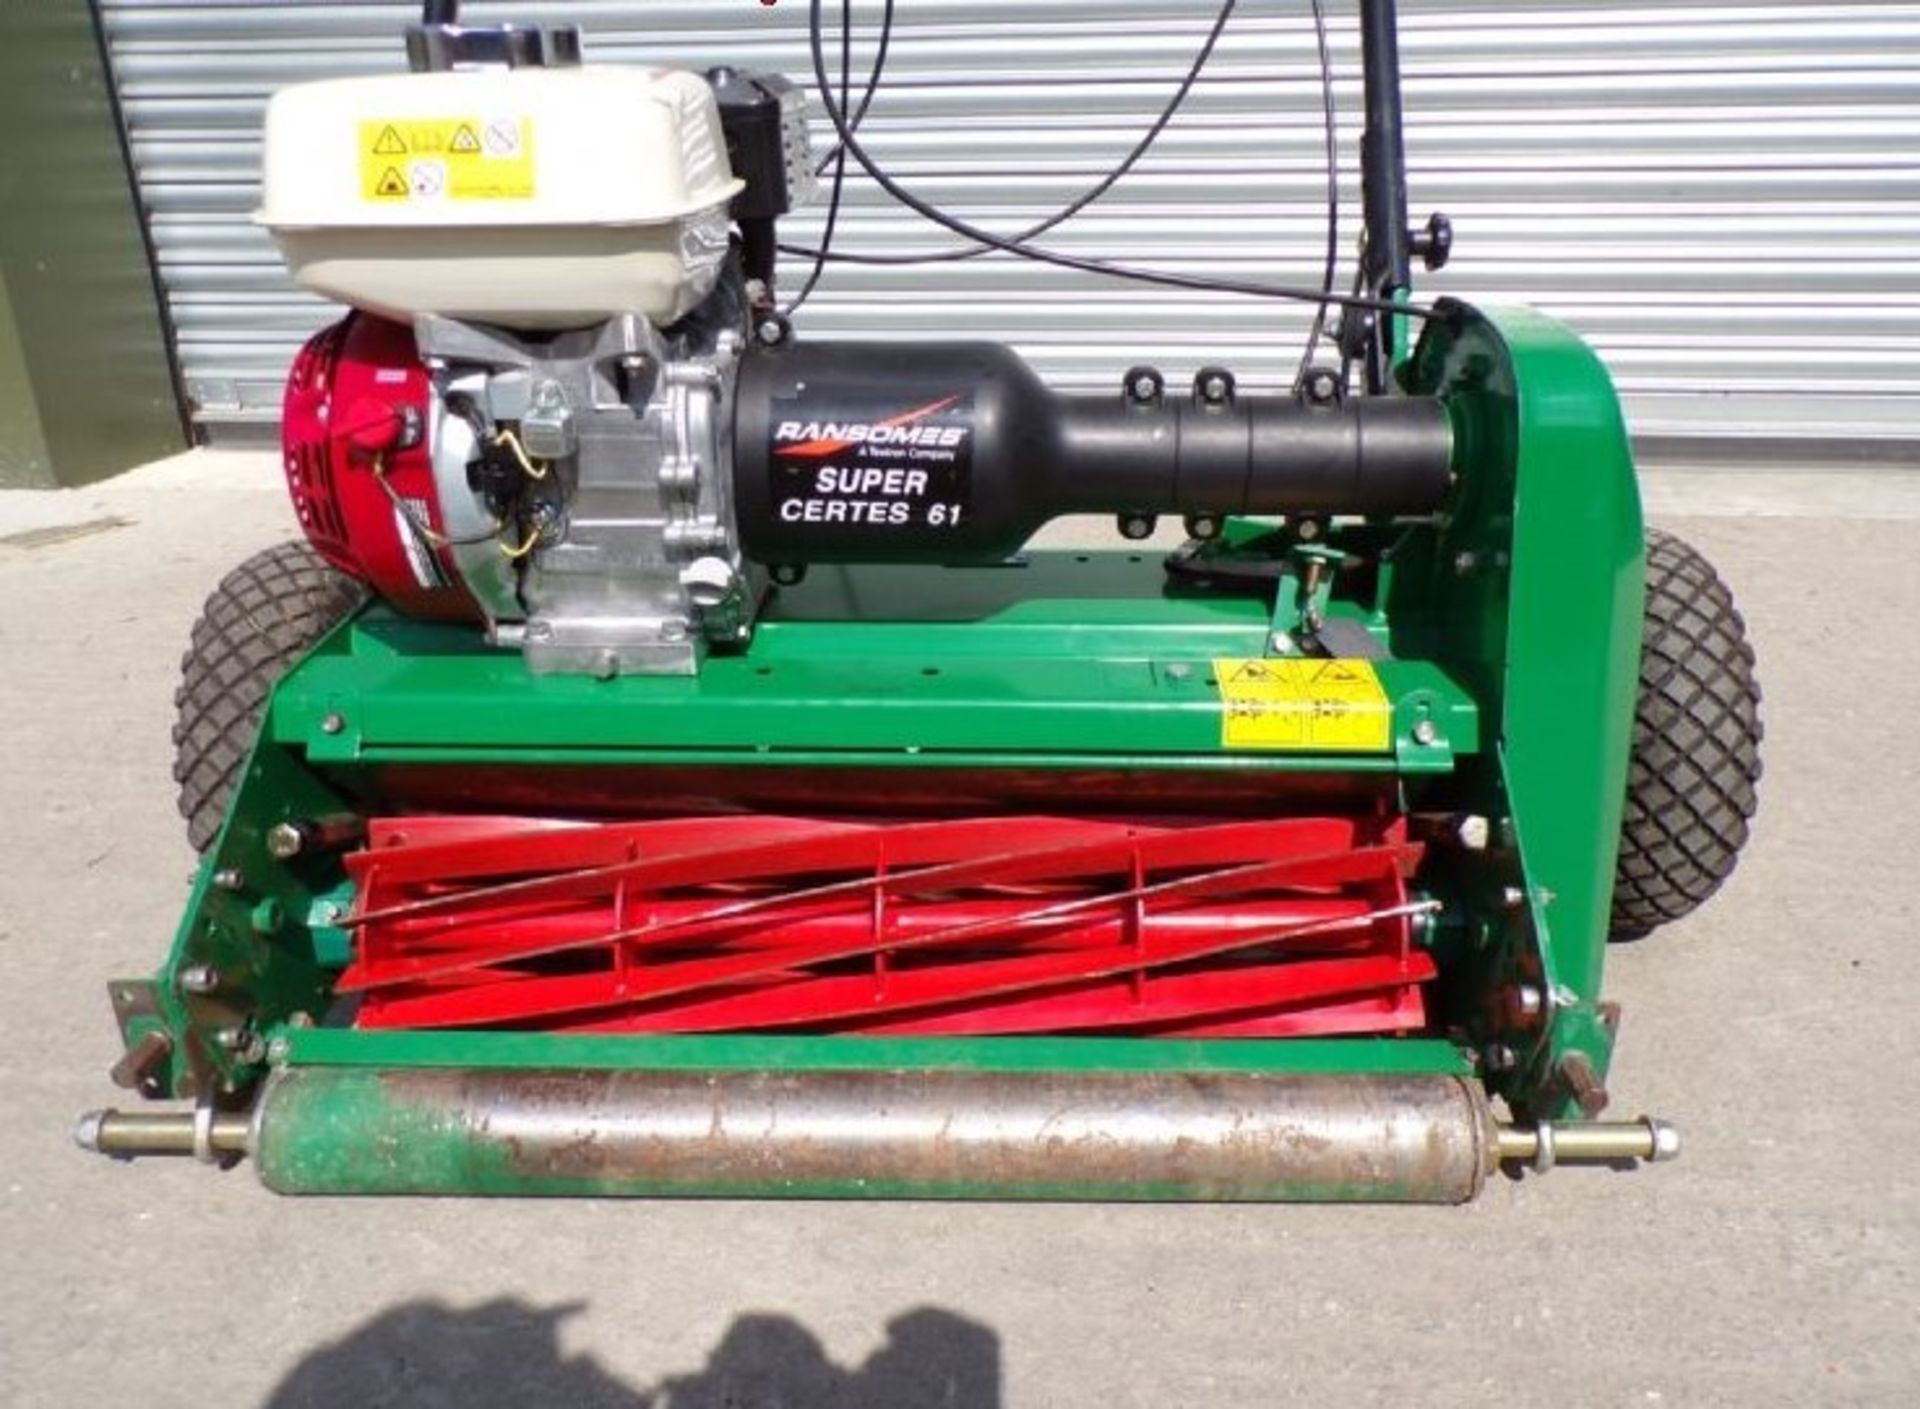 RANSOMES SUPER CERTES 61 AS NEW walk behind - Image 2 of 3